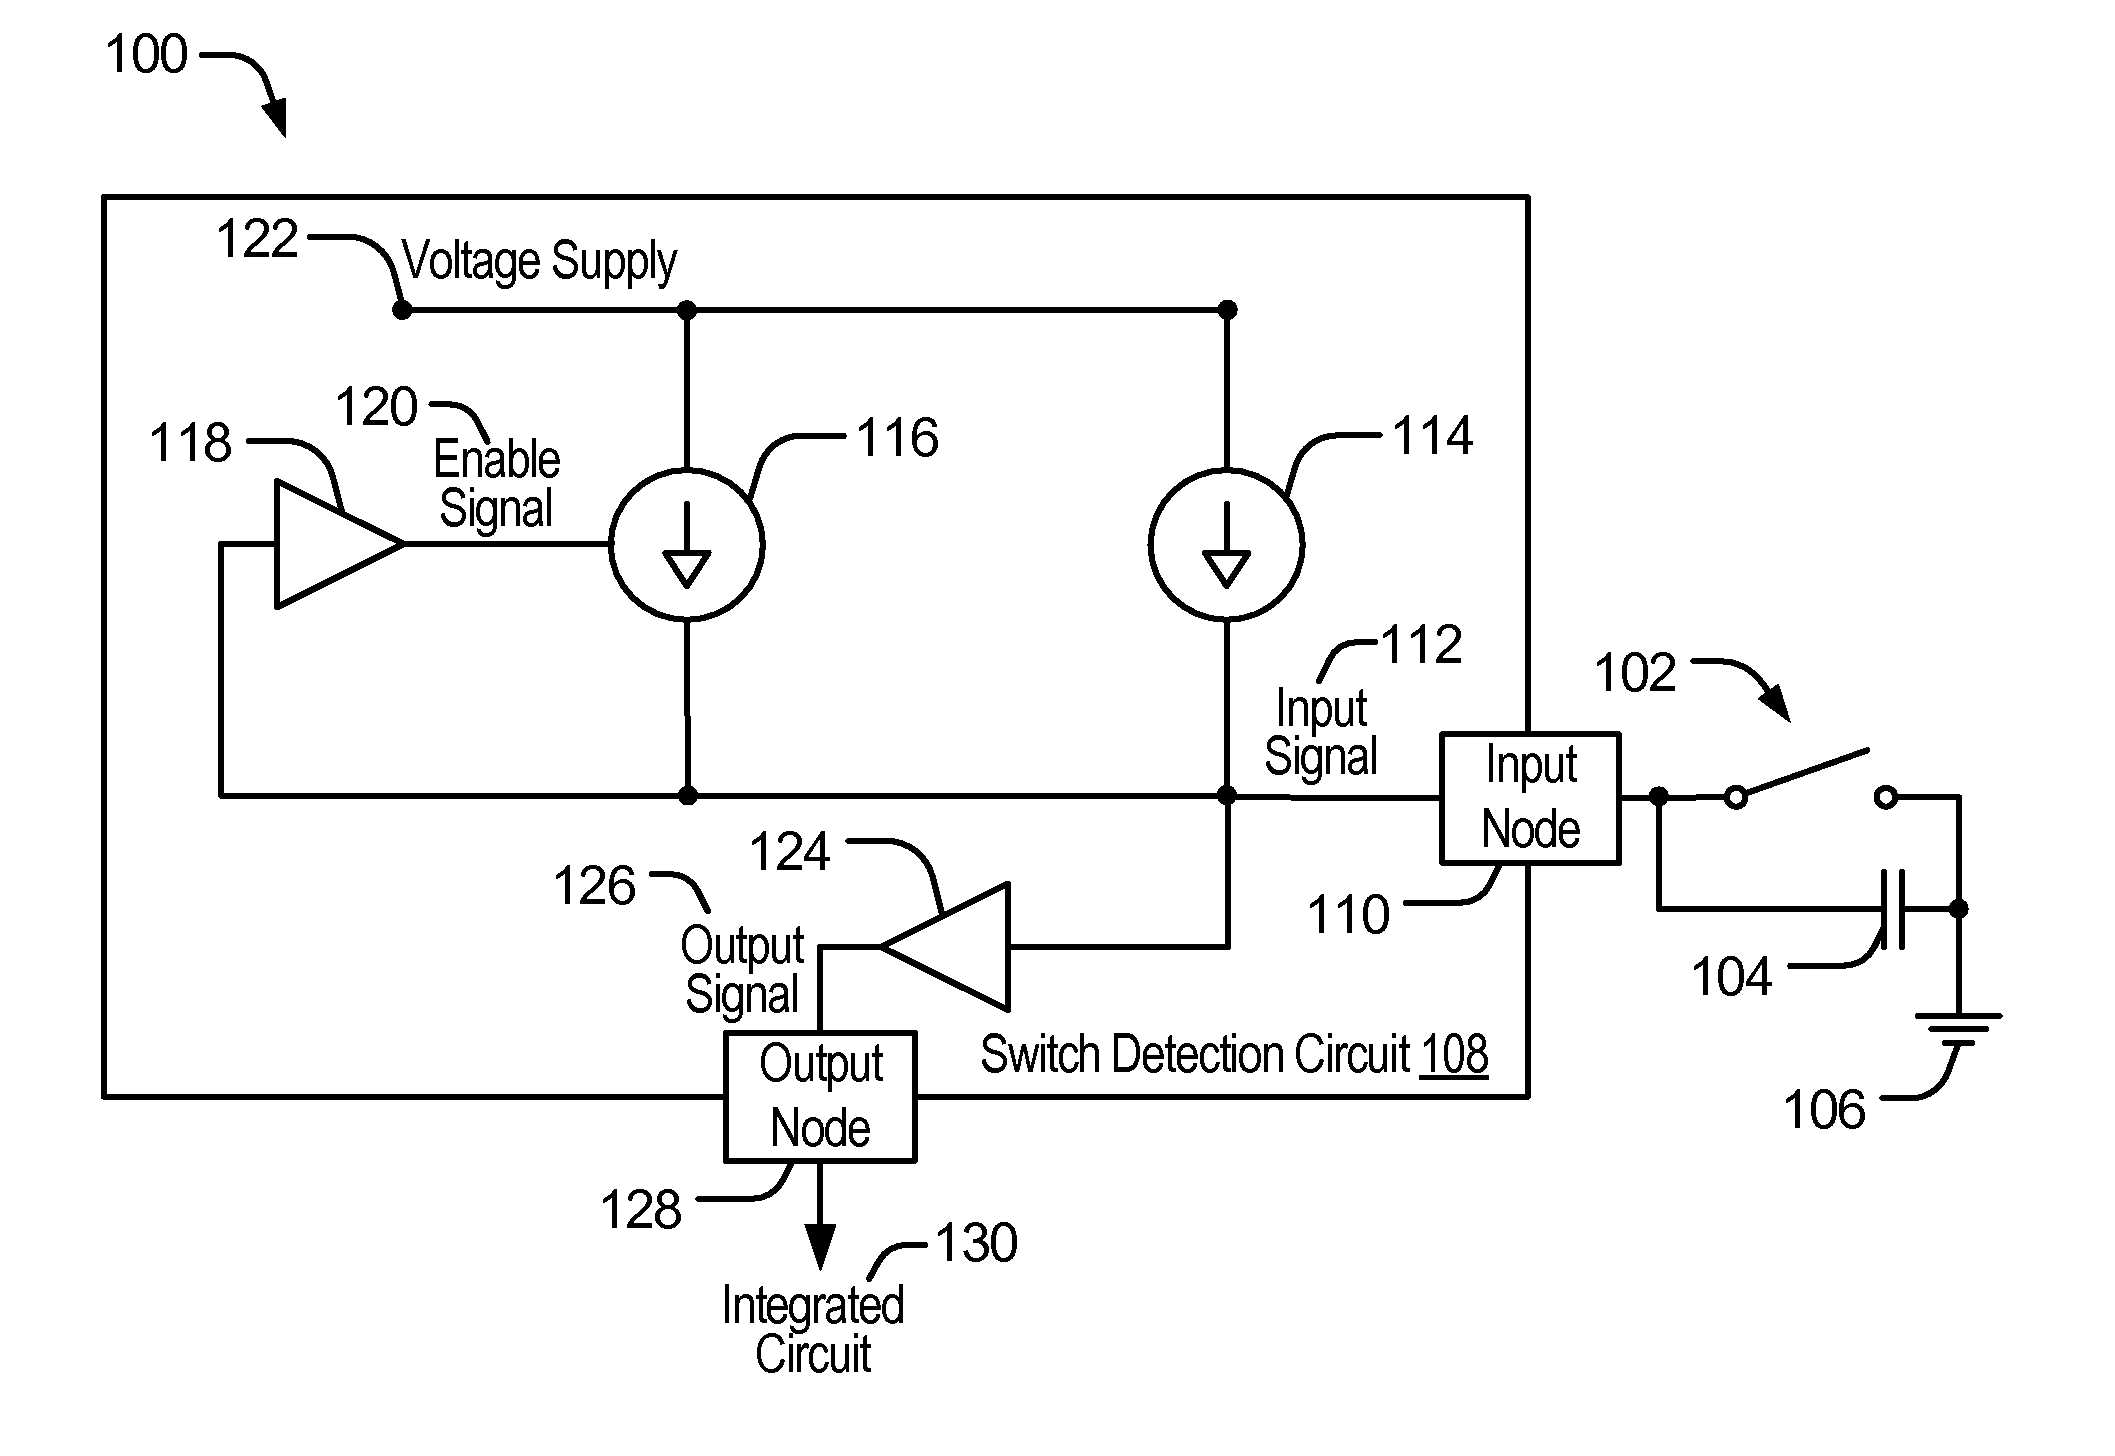 Dual current switch detection circuit with selective activation